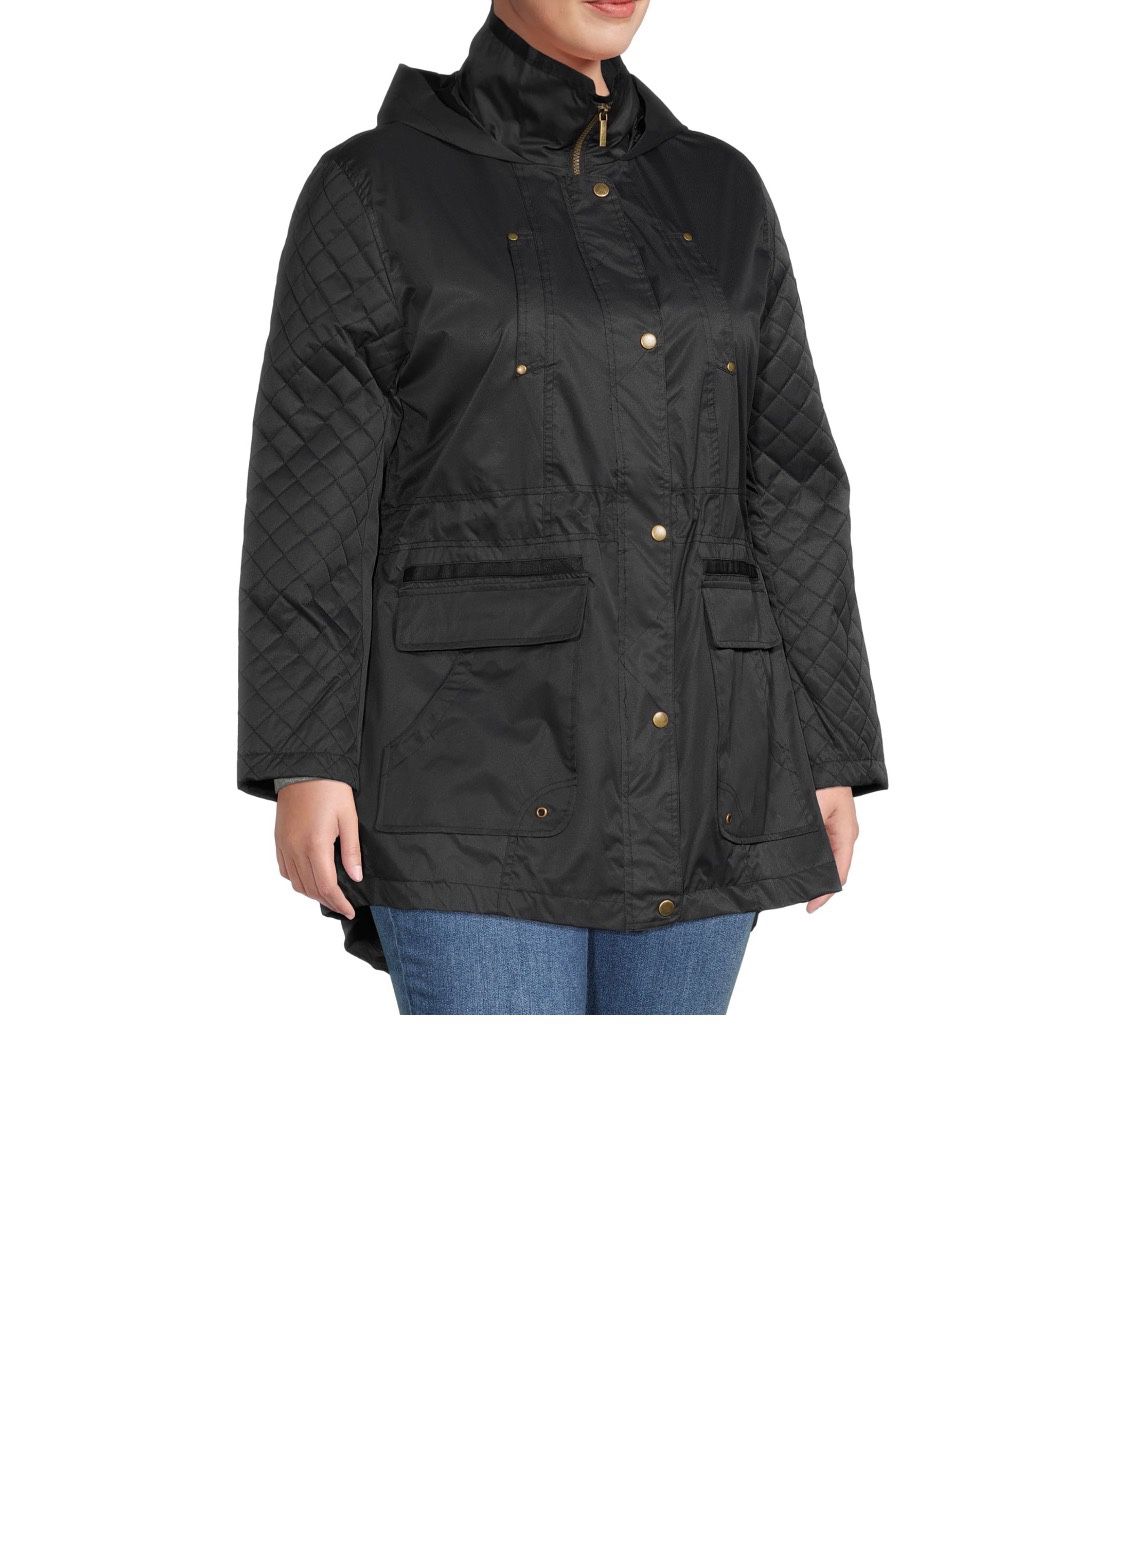 2 womans jackets super deal! u get both!!!! grab Now especially at this price!!